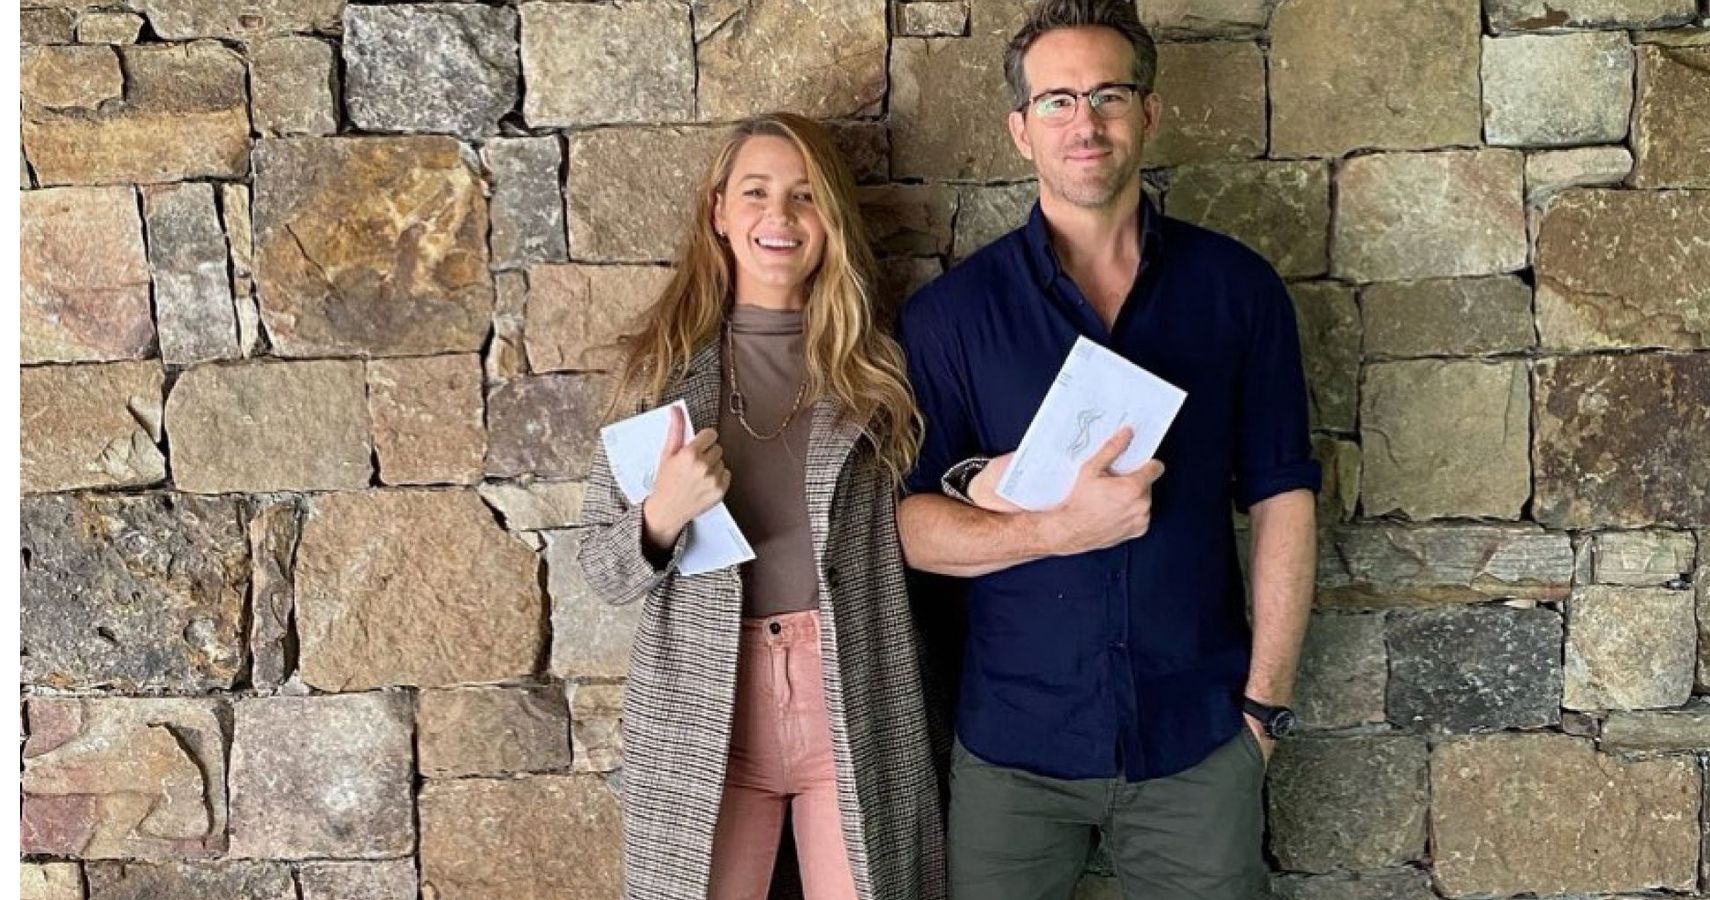 Blake Lively Photographed Barefoot With Hubby Urging Fans To Vote